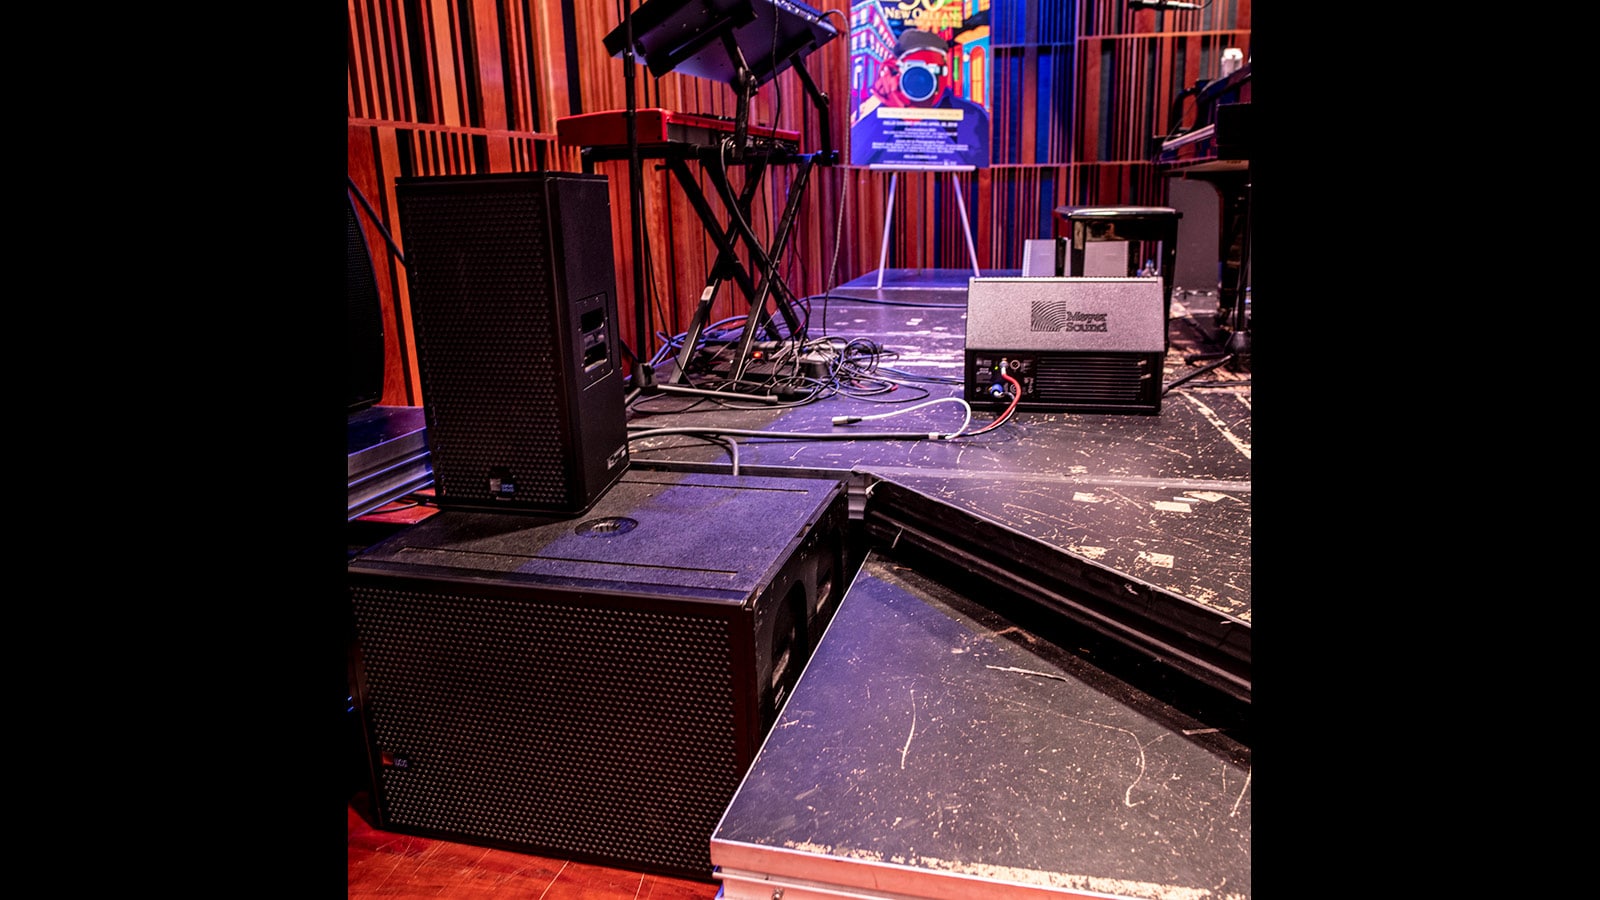 Meyer Sound Brings Festival Soundscapes to Life for New Orleans Jazz Museum Exhibition